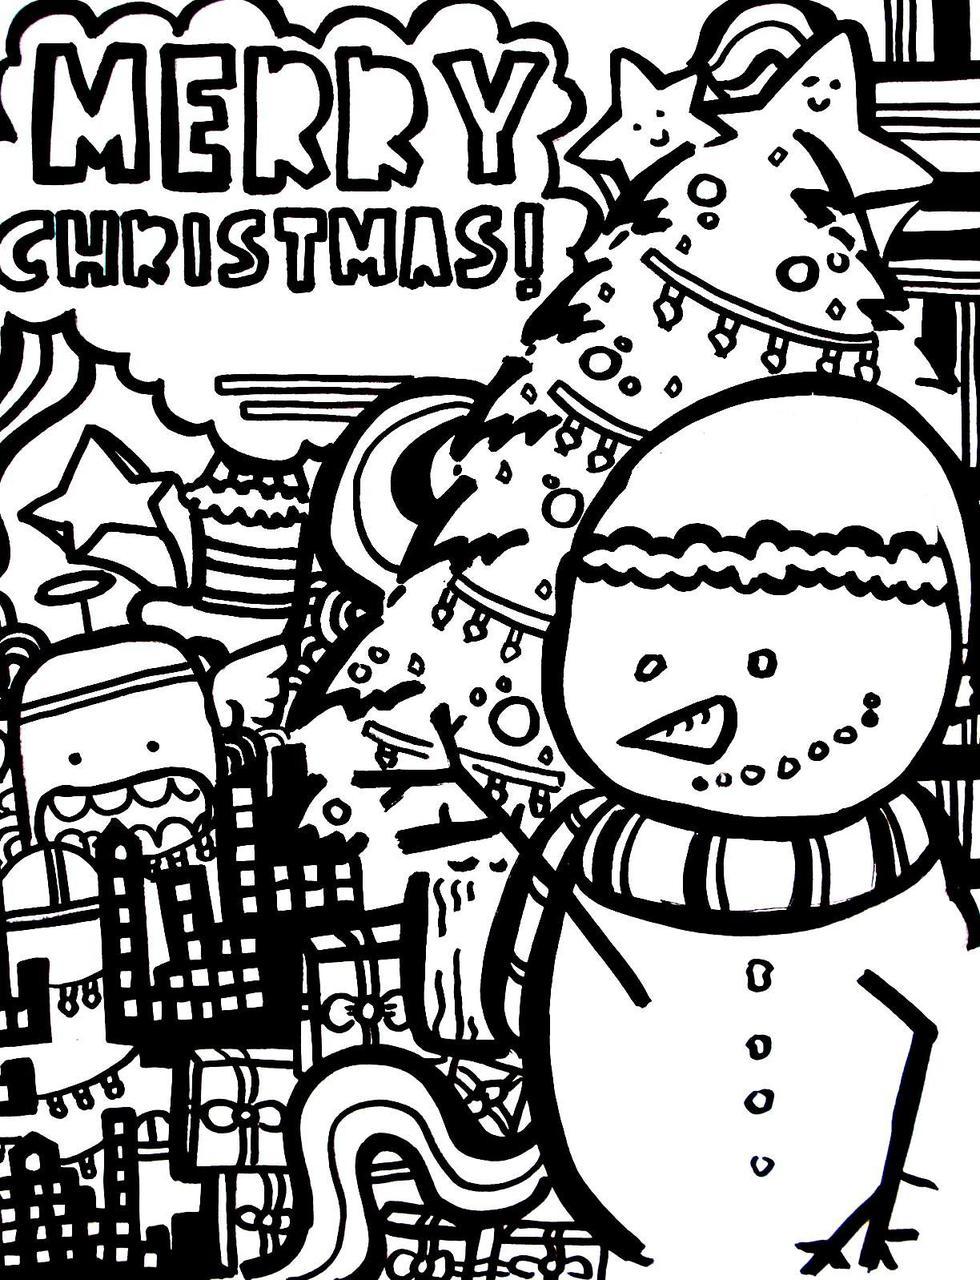 Happy Holidays, guys! Christmas is in the air, and obviously, in my doodles. :)) this is actually what is suppose to be the back cover of the next issue of our school newspaper. still a work in progress since I still have to color it in which is hell...